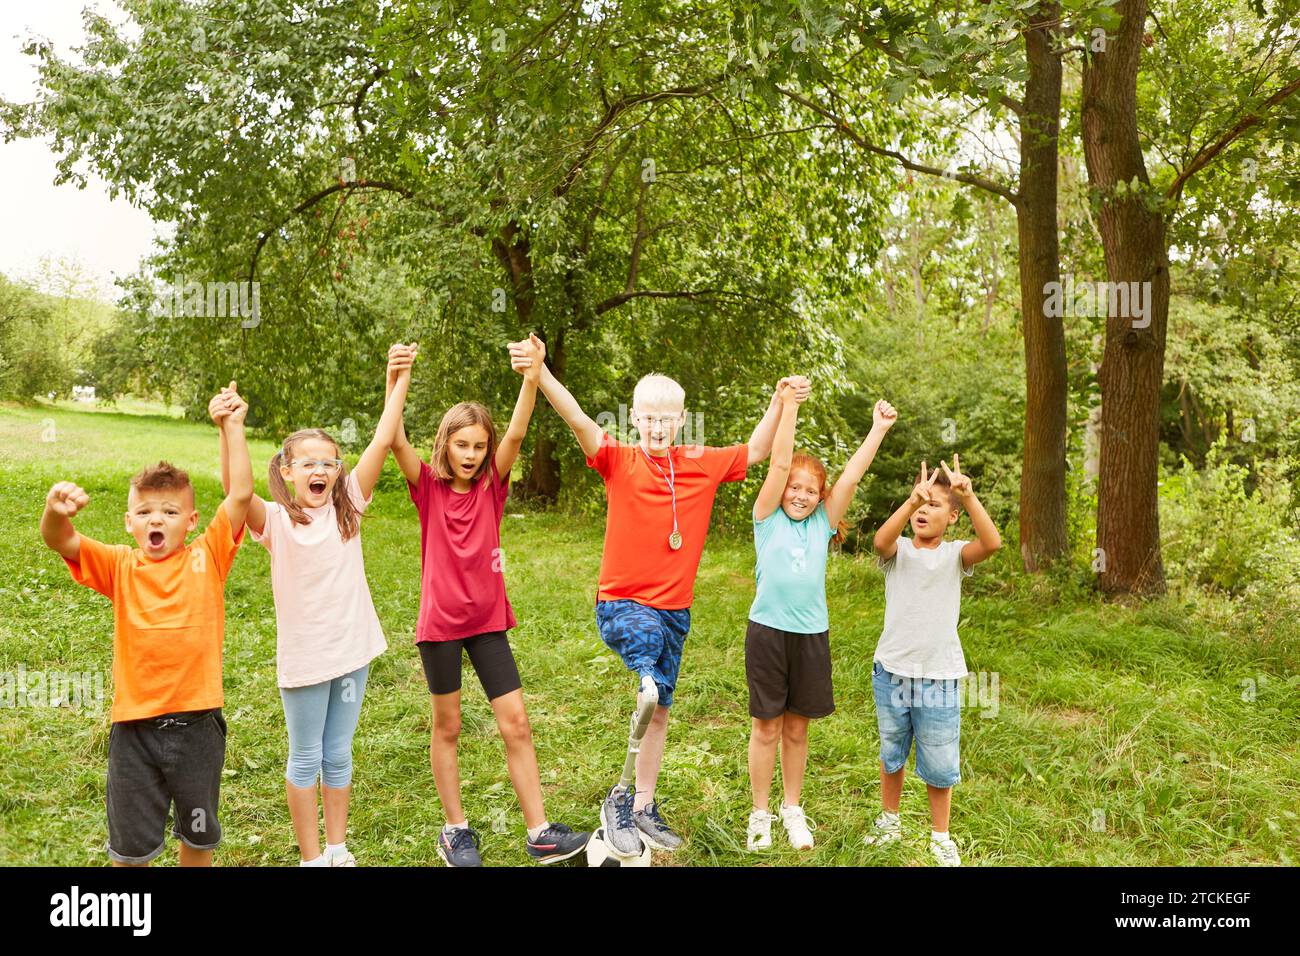 Cheerful male and female friends holding hands while celebrating at park Stock Photo